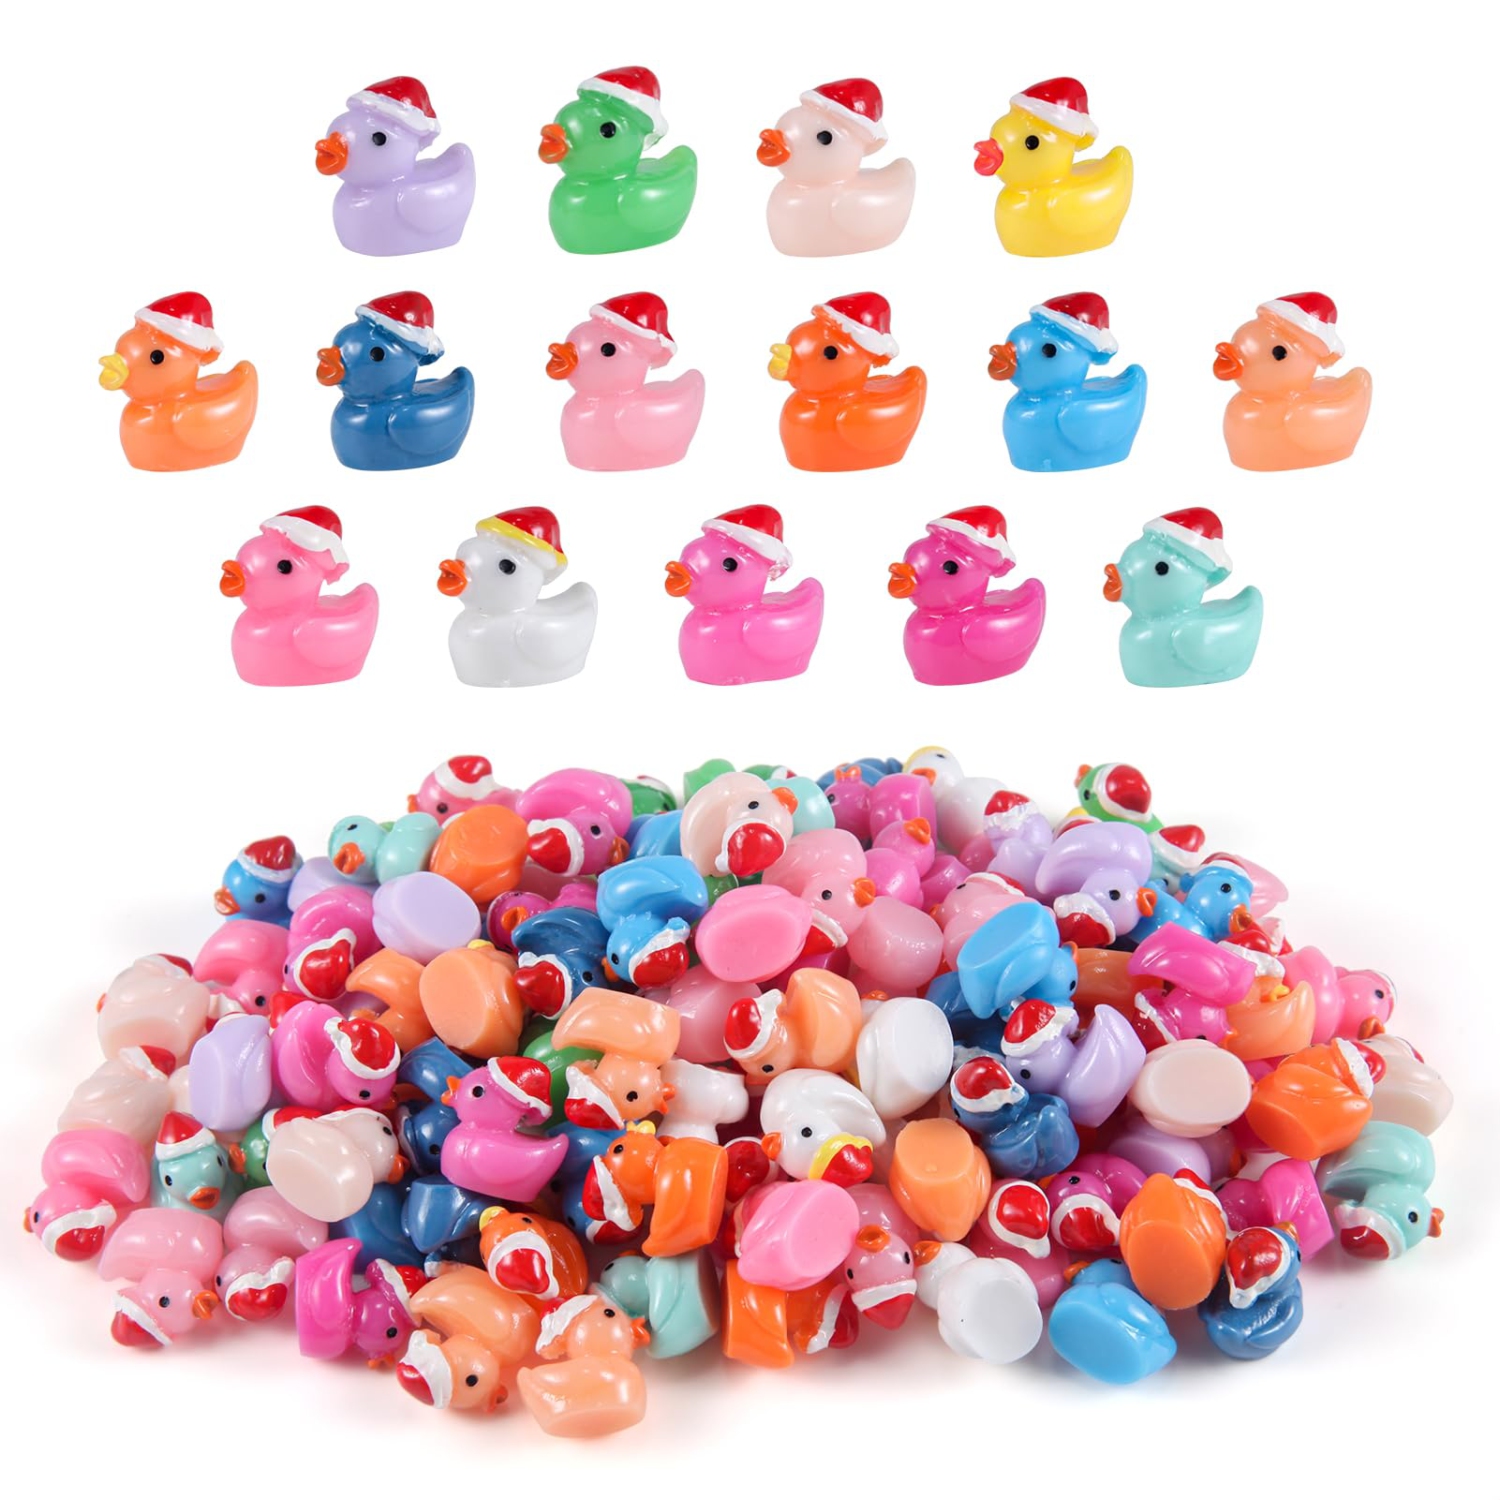 150 Mini Resin Ducks with Fairy Hat - Charming Micro Landscape Garden Dollhouse Decor for Xmas, DIY Crafts, Slime Party Gifts, Prank Game, Ornament for Potted Plants